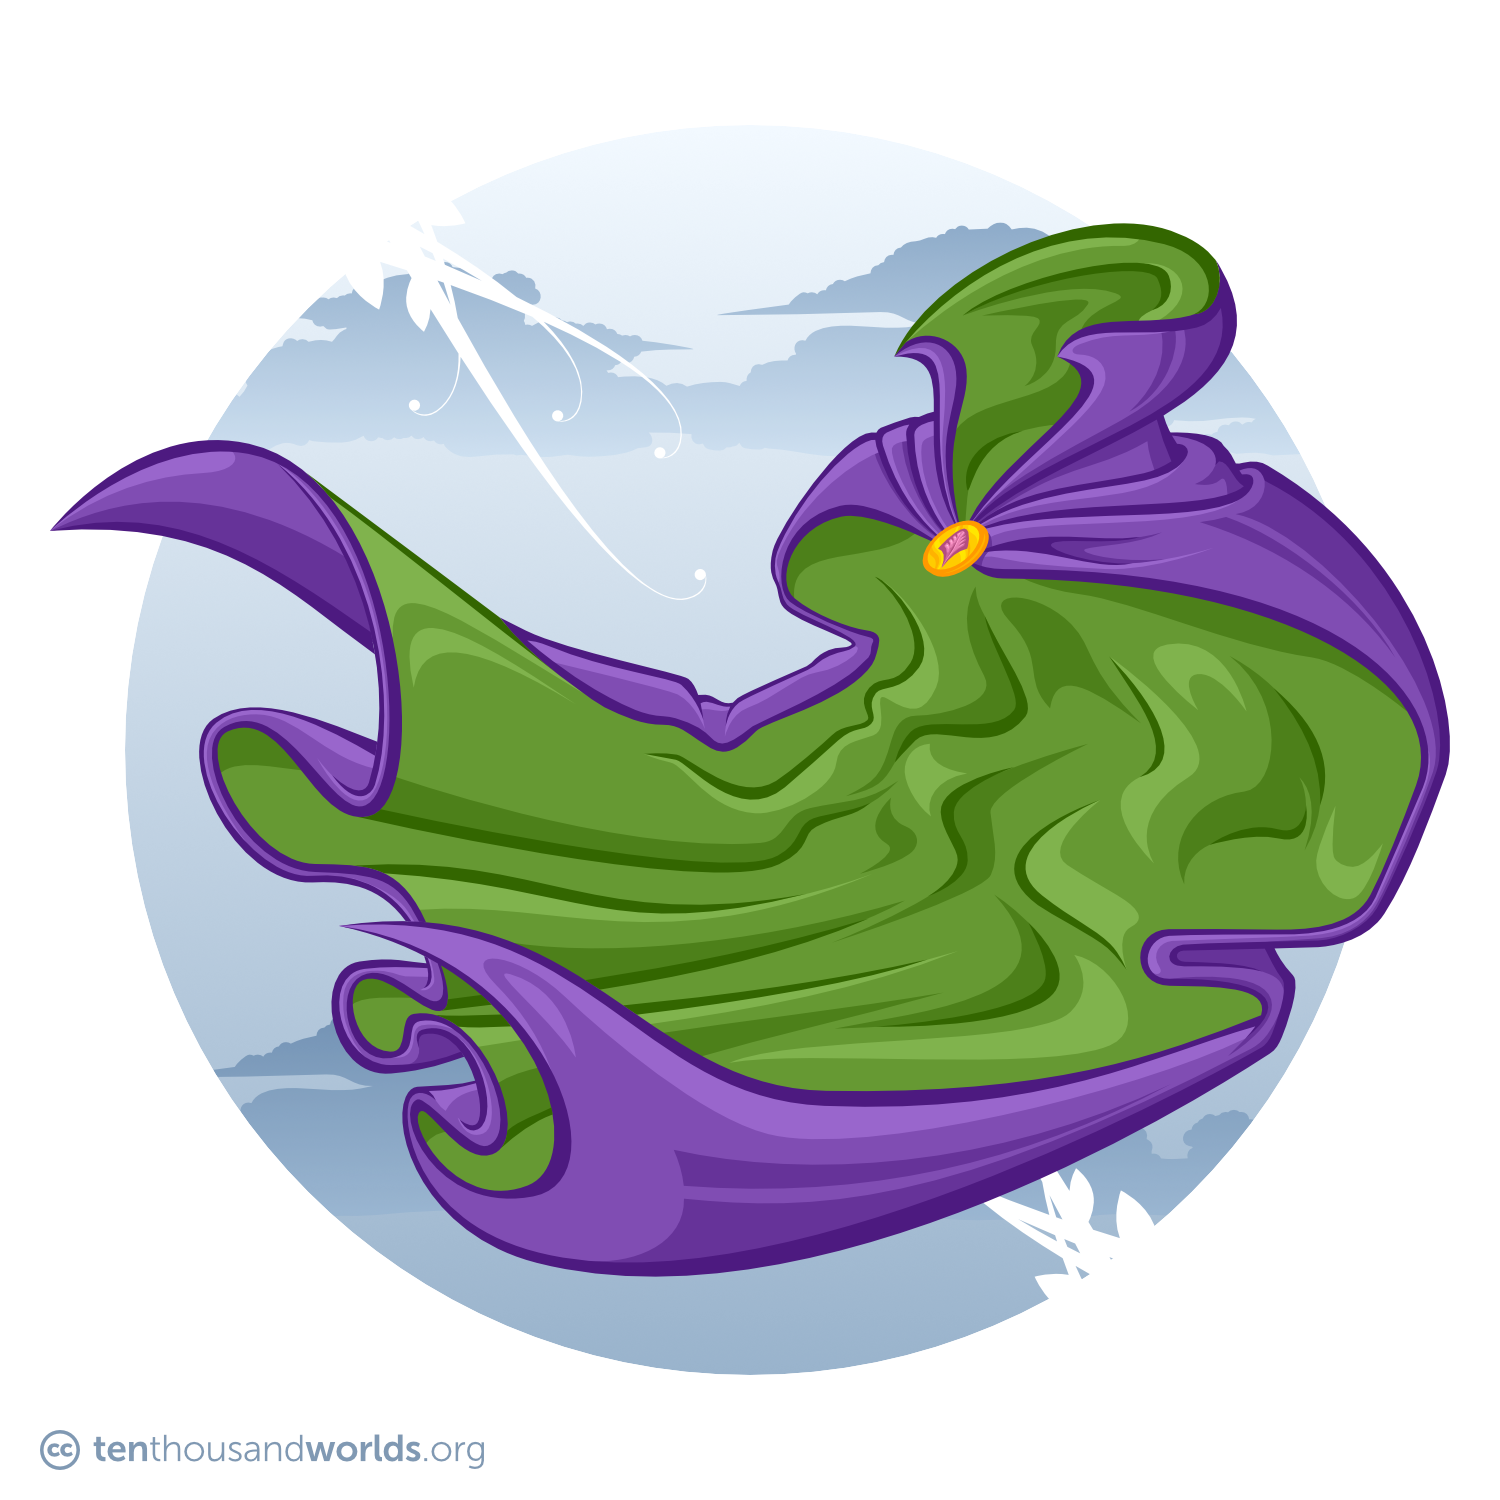 A voluminous fluttering purple cloak lined in emerald green, with a large popped collar and a golden oval clasp set with a pink gem carved into the shape of an abstract feather.